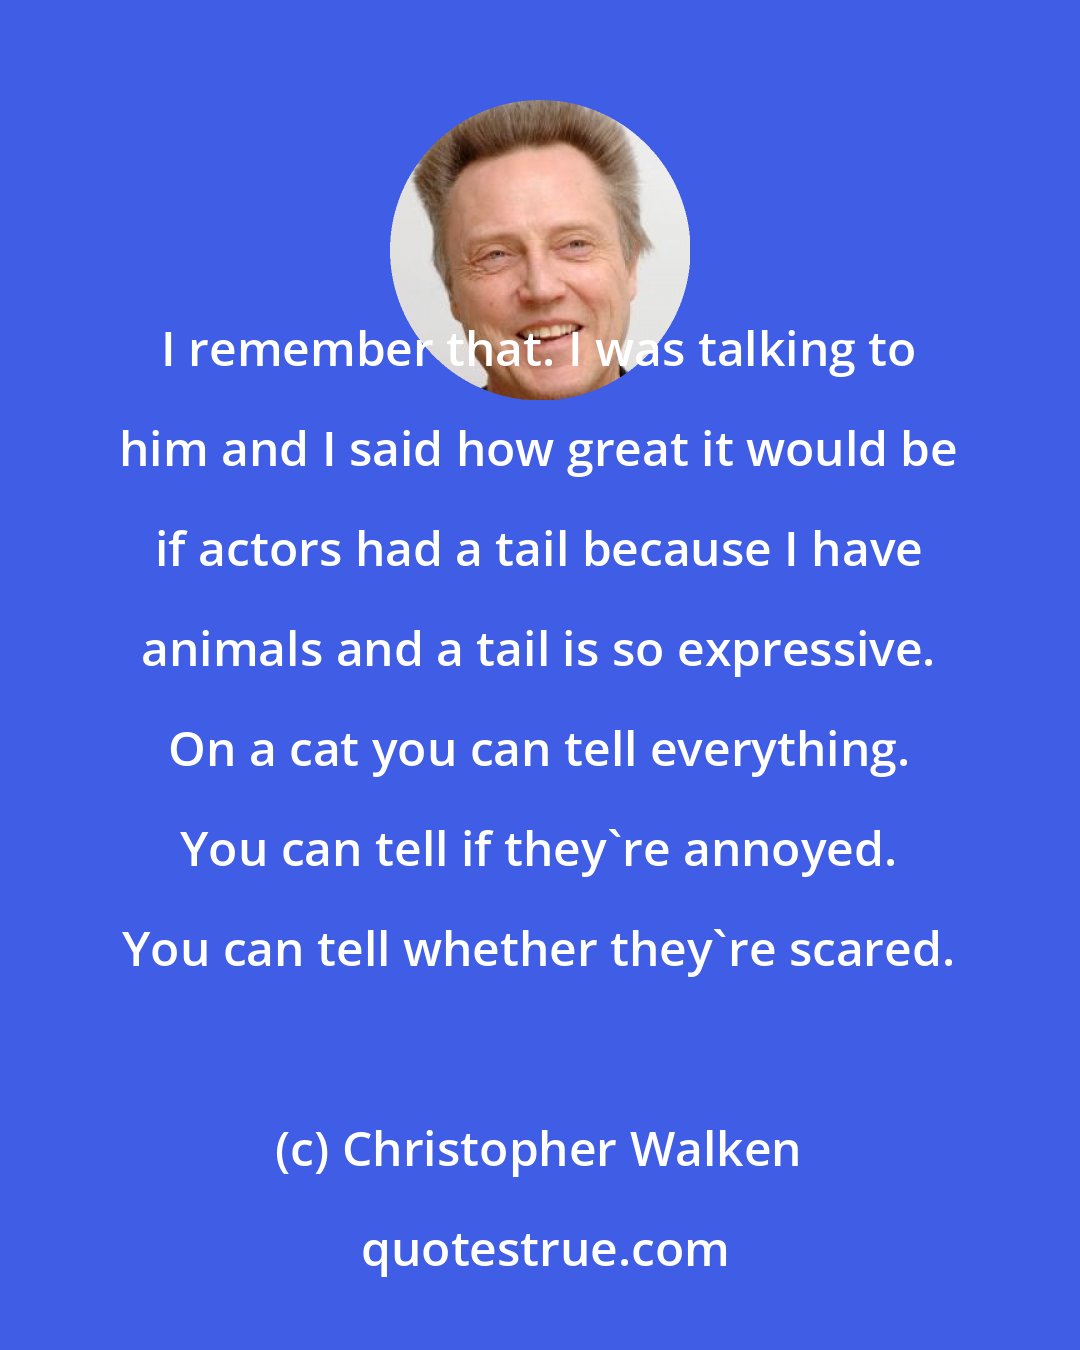 Christopher Walken: I remember that. I was talking to him and I said how great it would be if actors had a tail because I have animals and a tail is so expressive. On a cat you can tell everything. You can tell if they're annoyed. You can tell whether they're scared.